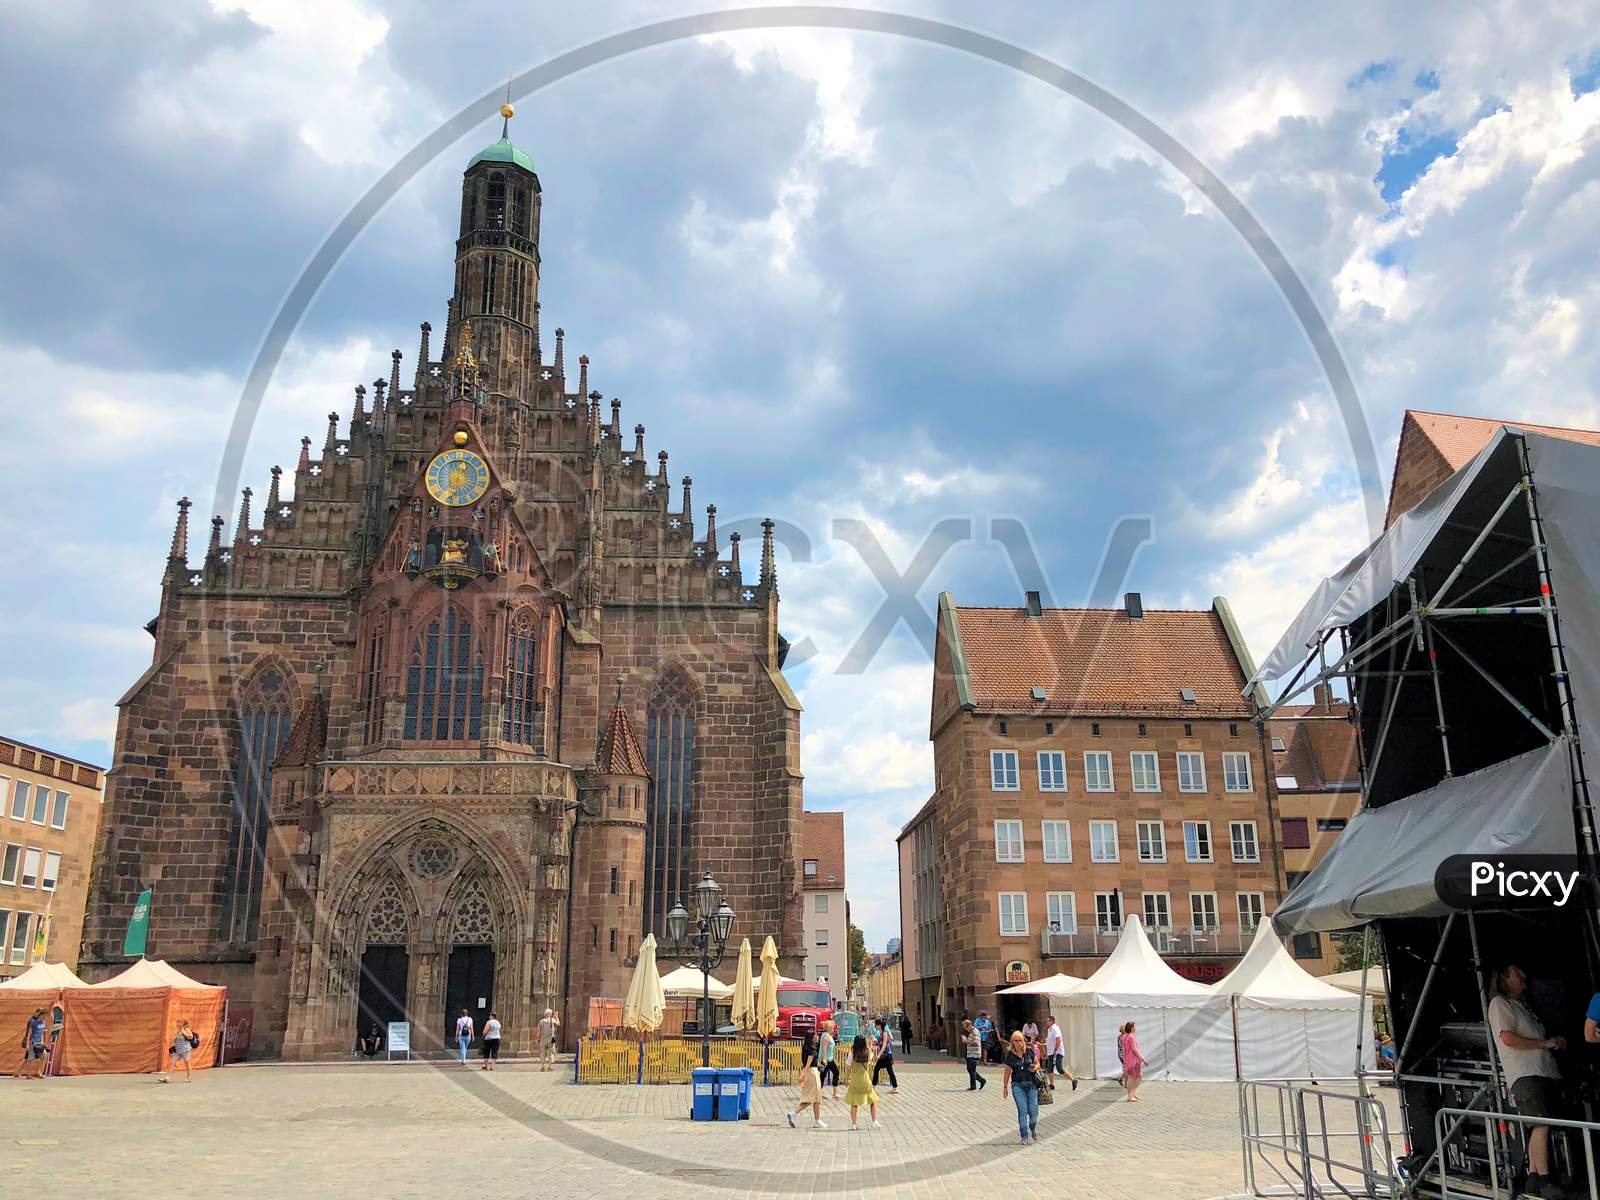 Catholic Church In The Center Of Nuremberg In Germany 27.7.2018